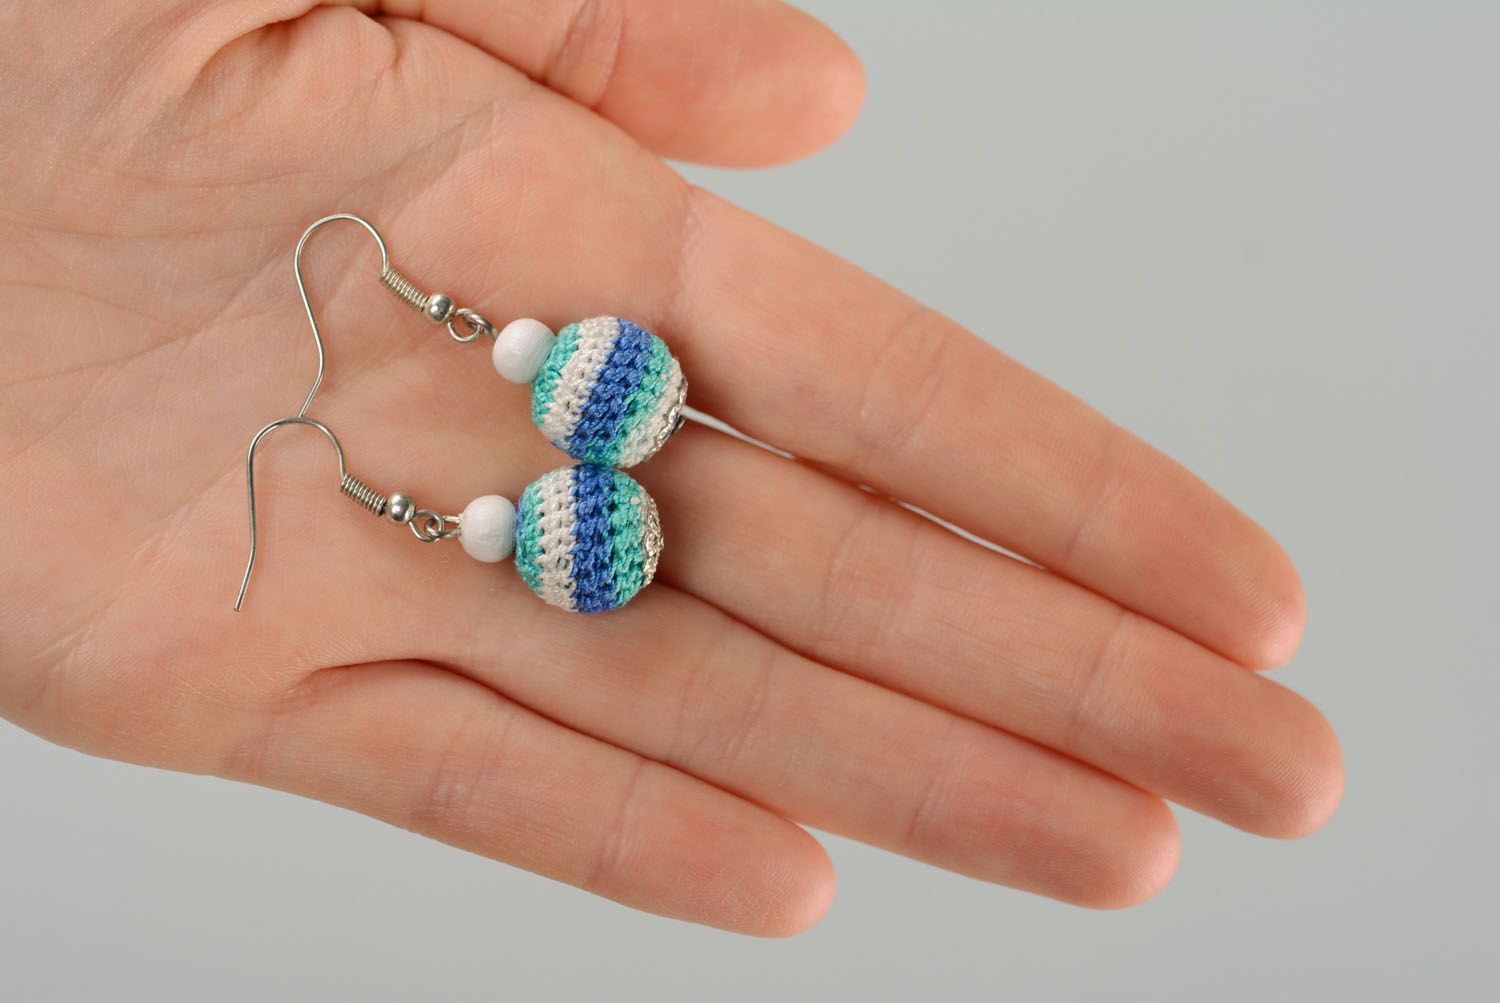 Earrings with beads crocheted over with cotton threads photo 5